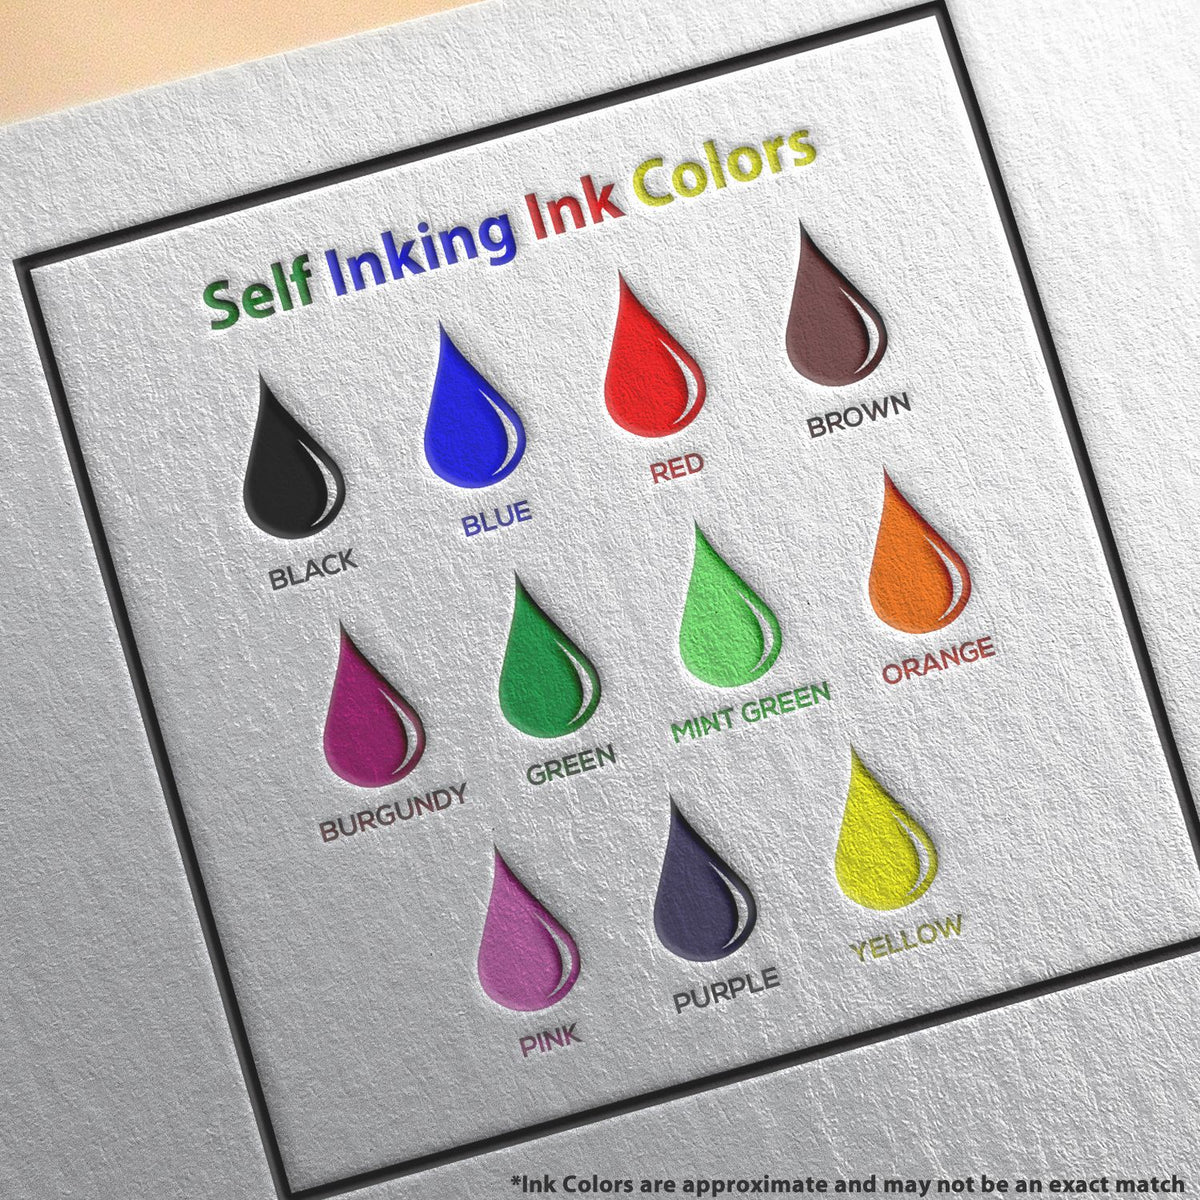 A picture showing the different ink colors or hues available for the Self-Inking Rectangular Pennsylvania Notary Stamp product.